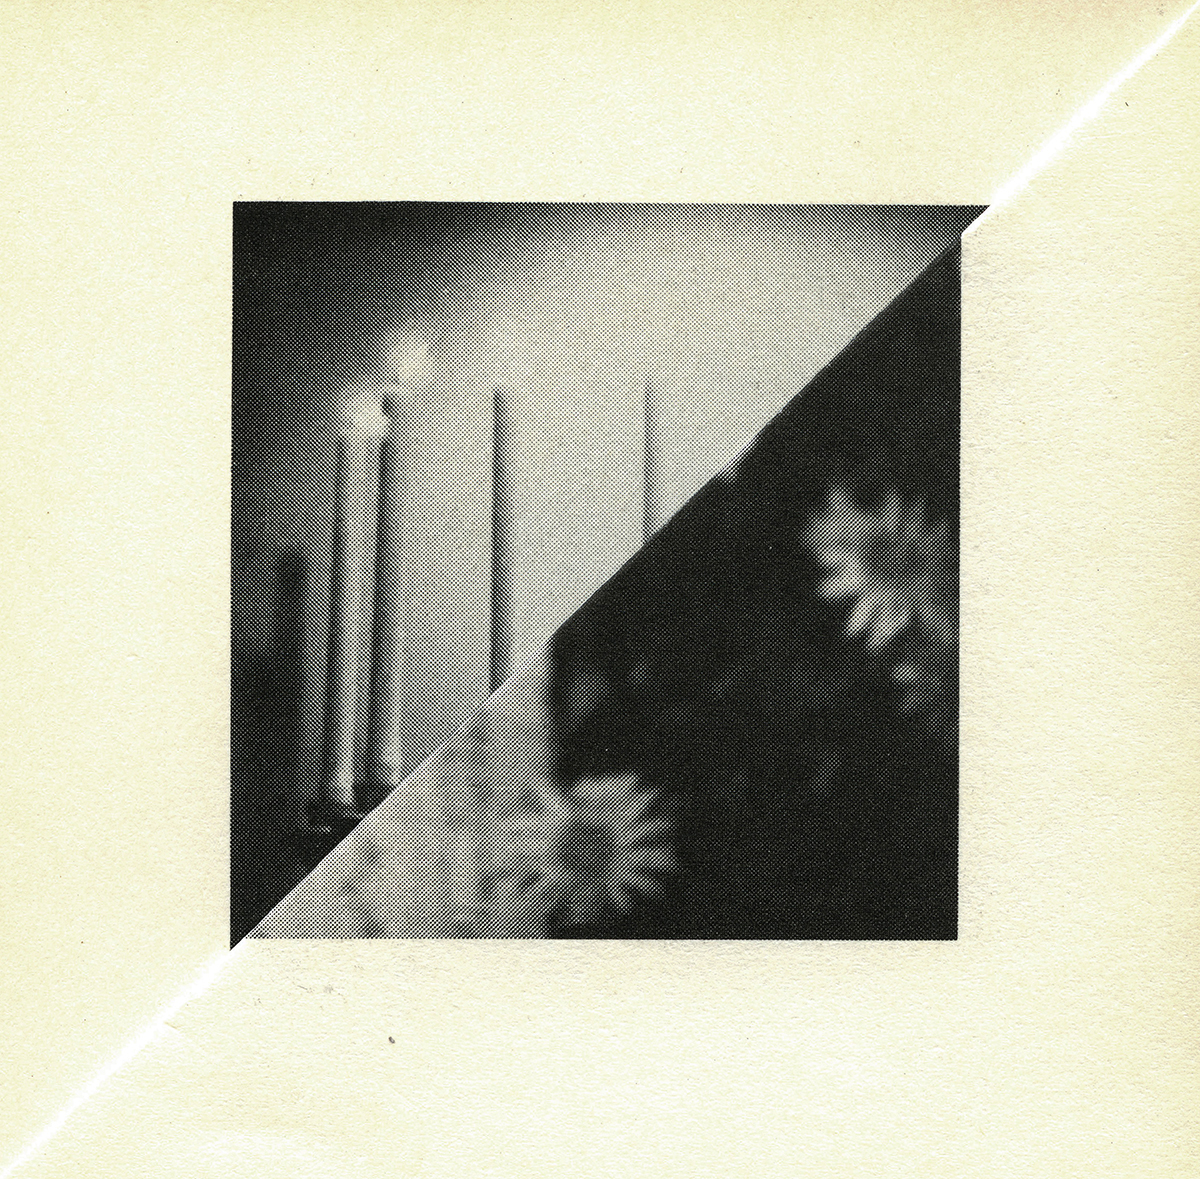 Image of the folded corner of the yellowed page of a book with a a central black and white square of imagery made of two triangles, showing candles and daisy flowers, which is the result of the folding of the page, and the internal images on the facing book pages.